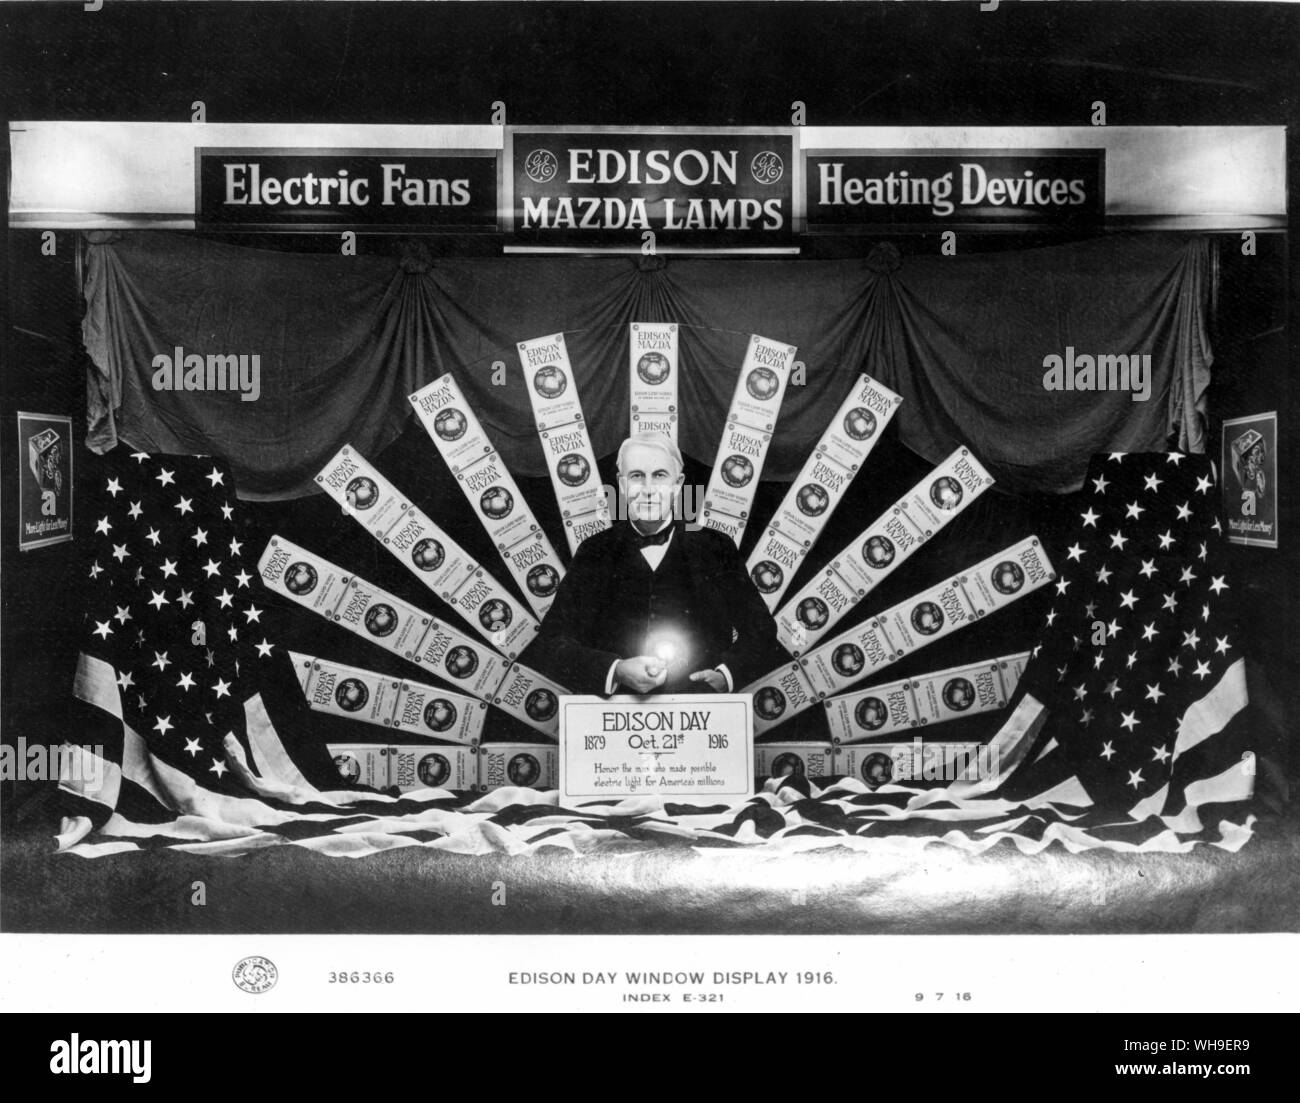 Thomas A Edison (1847-1931), US scientist and inventor who formed the Edison Light Company in 1889. Edison Day window display, 1916. Stock Photo